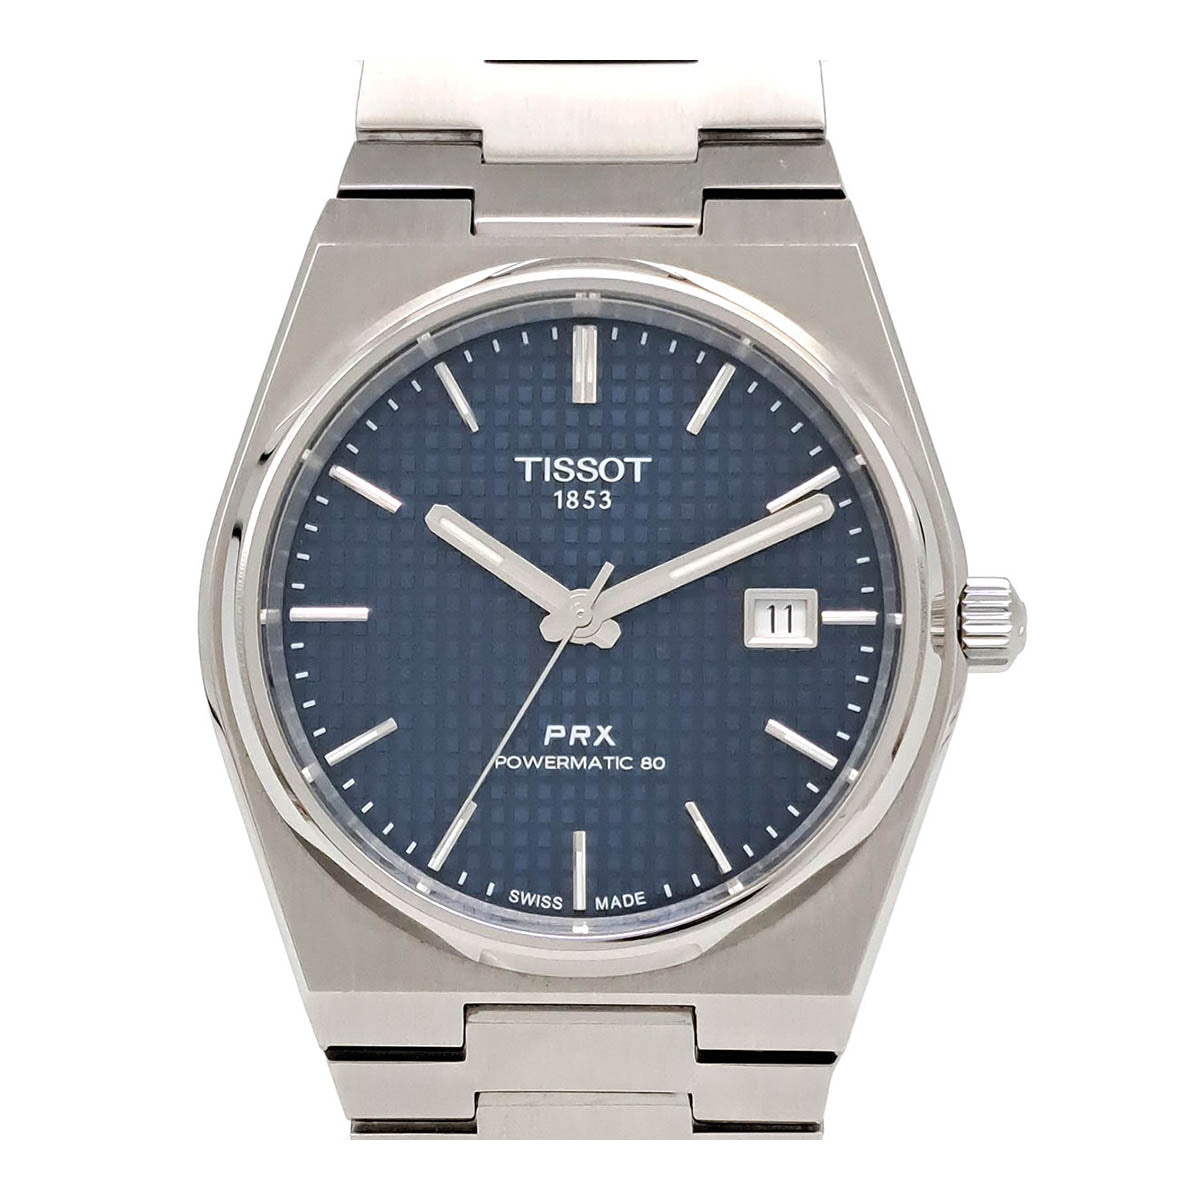 Tissot "PRX Powermatic 80" Men's Automatic Wristwatch in Stainless Steel T137407A